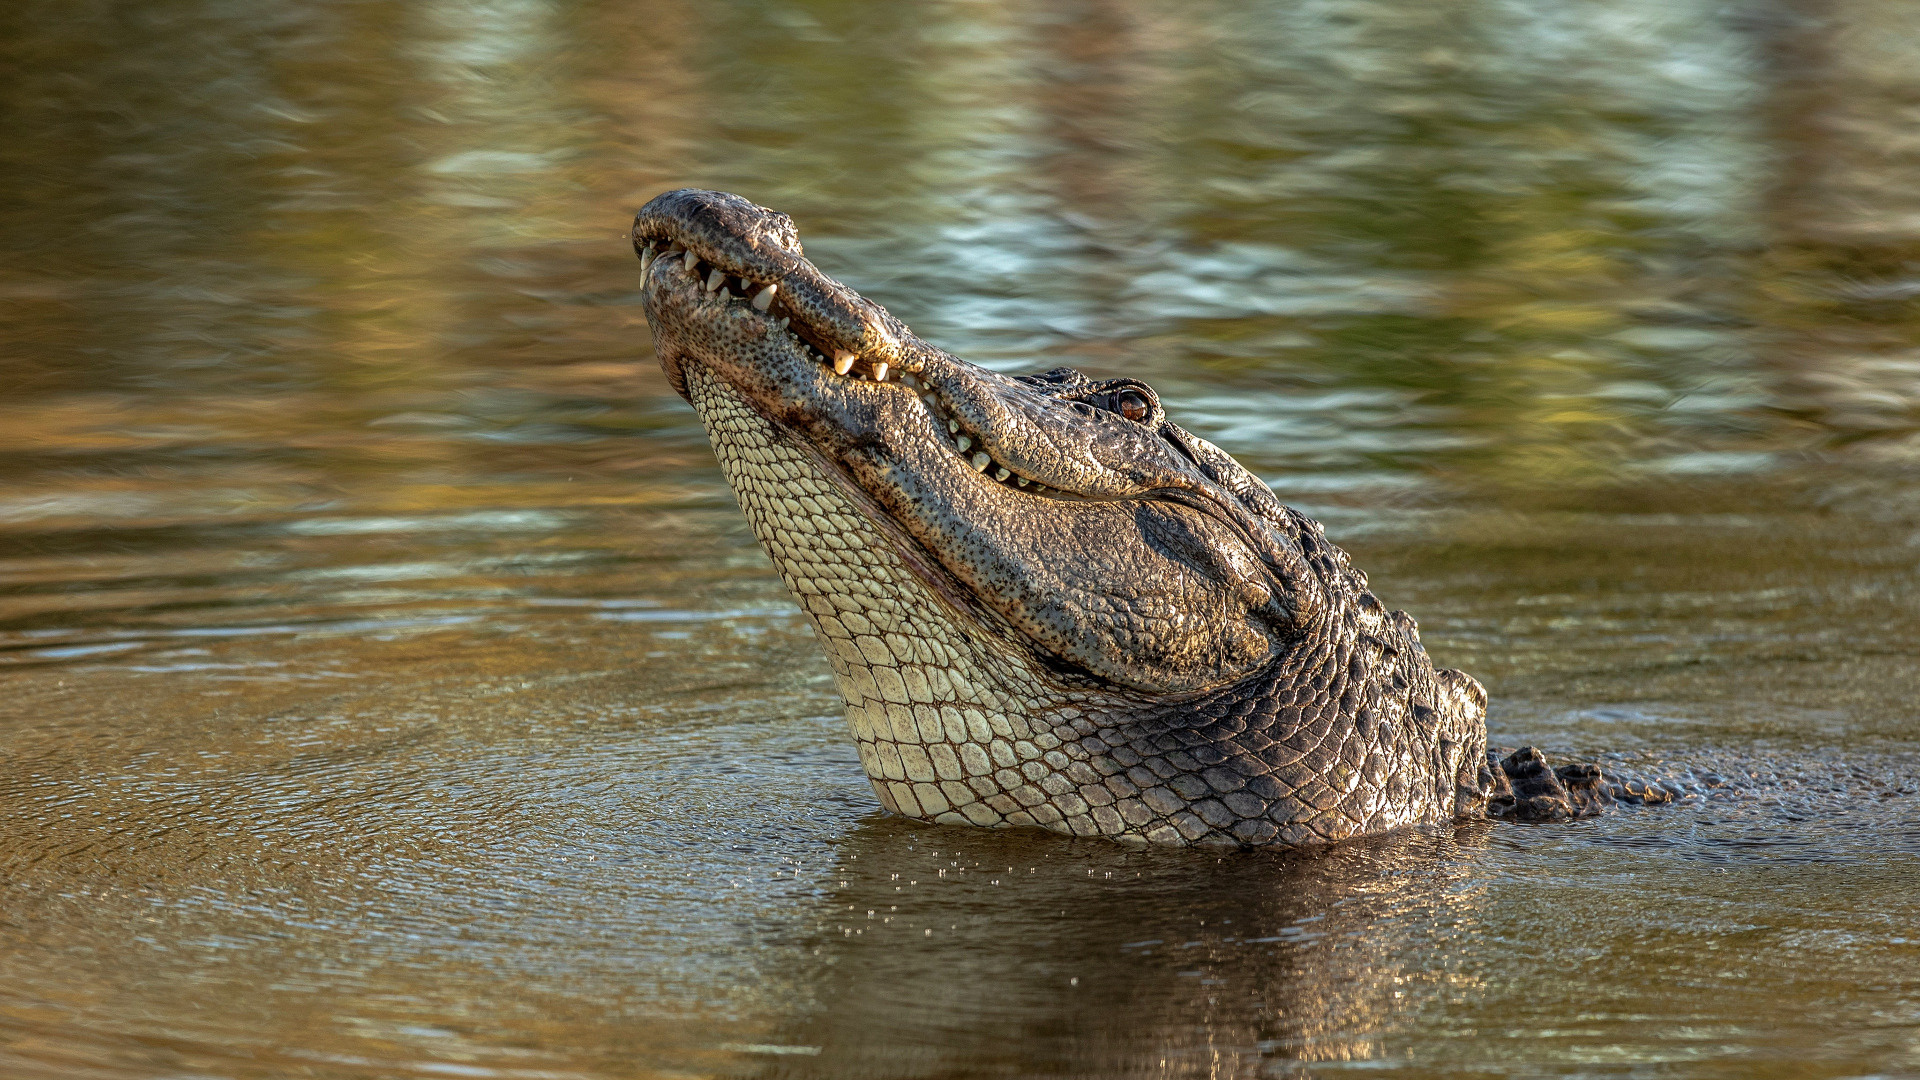 Crocodile: Carnivorous animals, Efficient hunters, with excellent hearing and eyesight. 1920x1080 Full HD Wallpaper.